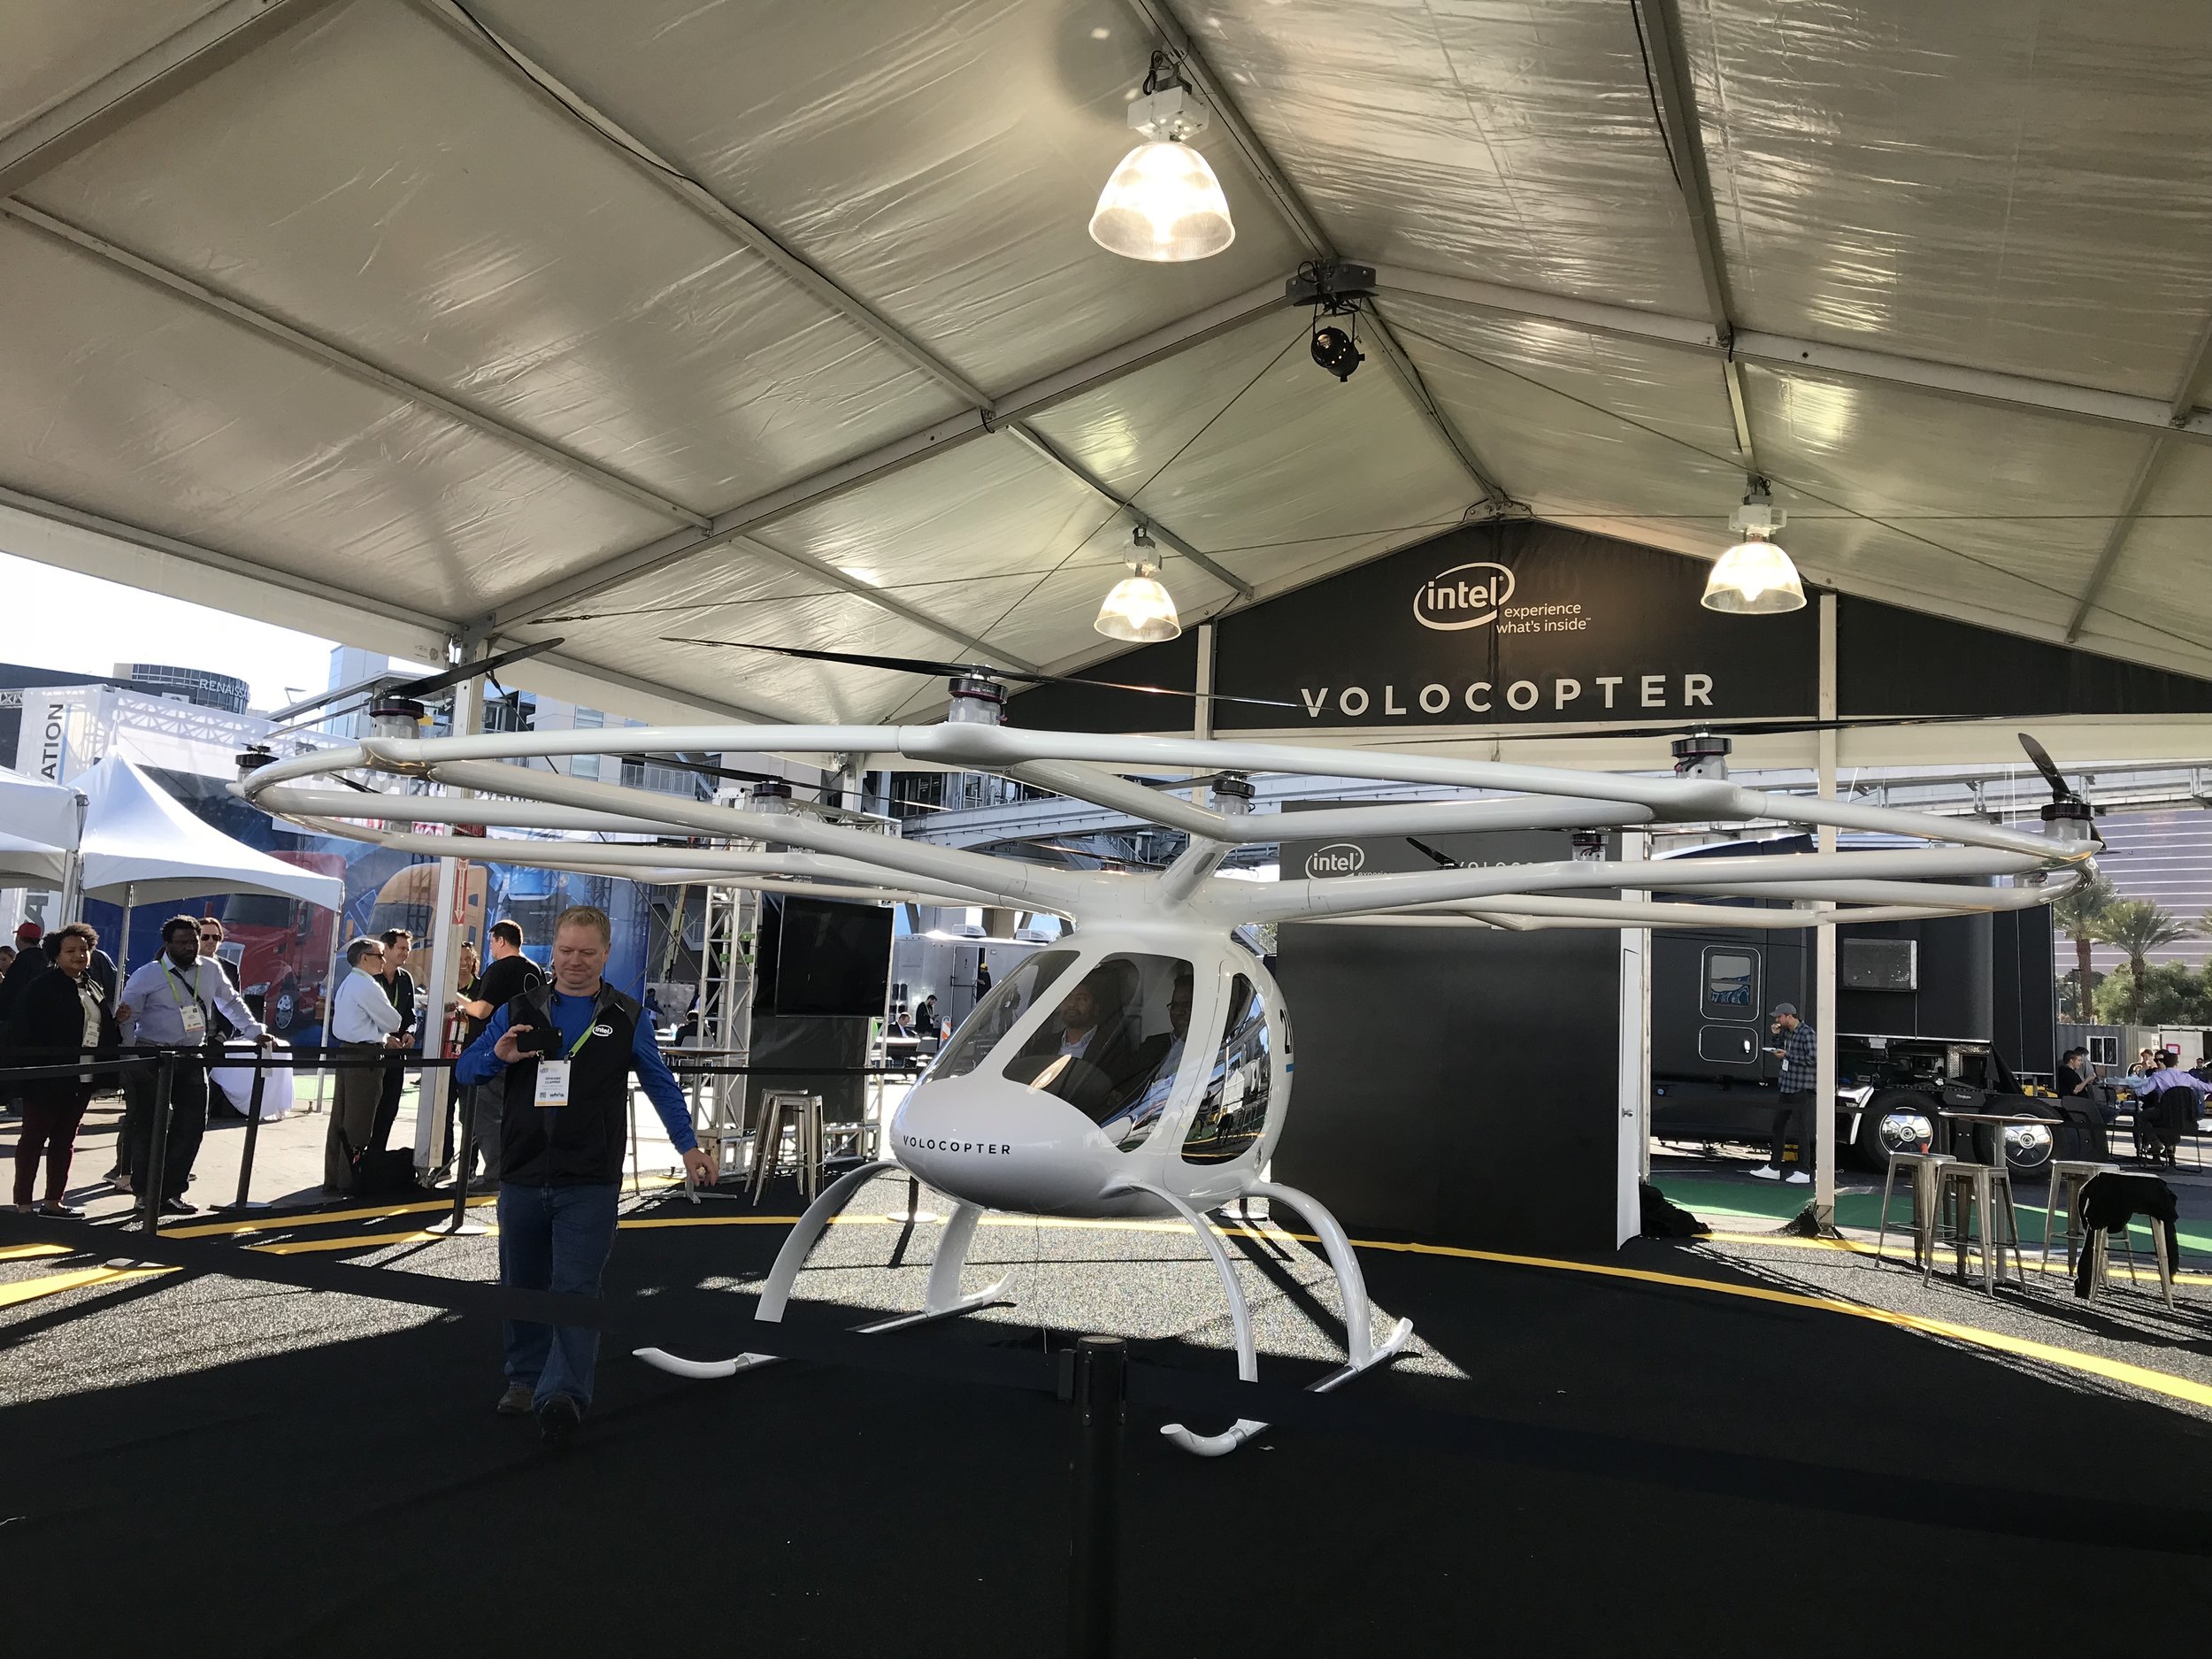 Volocopter - Intel wants you inside a drone